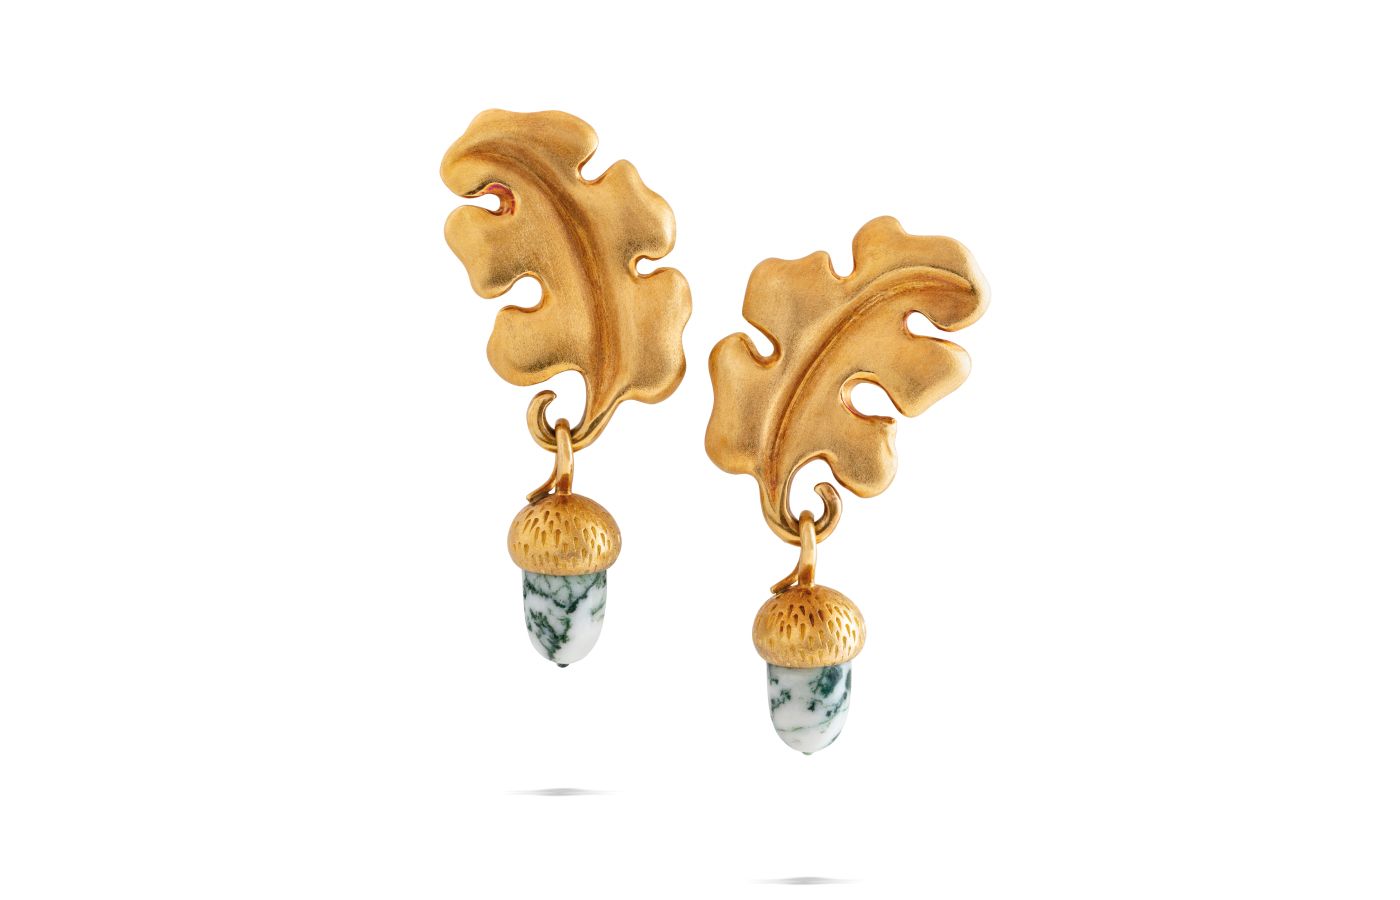 JAR earrings with moss agate acorns in textured 18k yellow gold, due to be sold at the Christie’s Magnificent Jewels auction on 17 May 2023